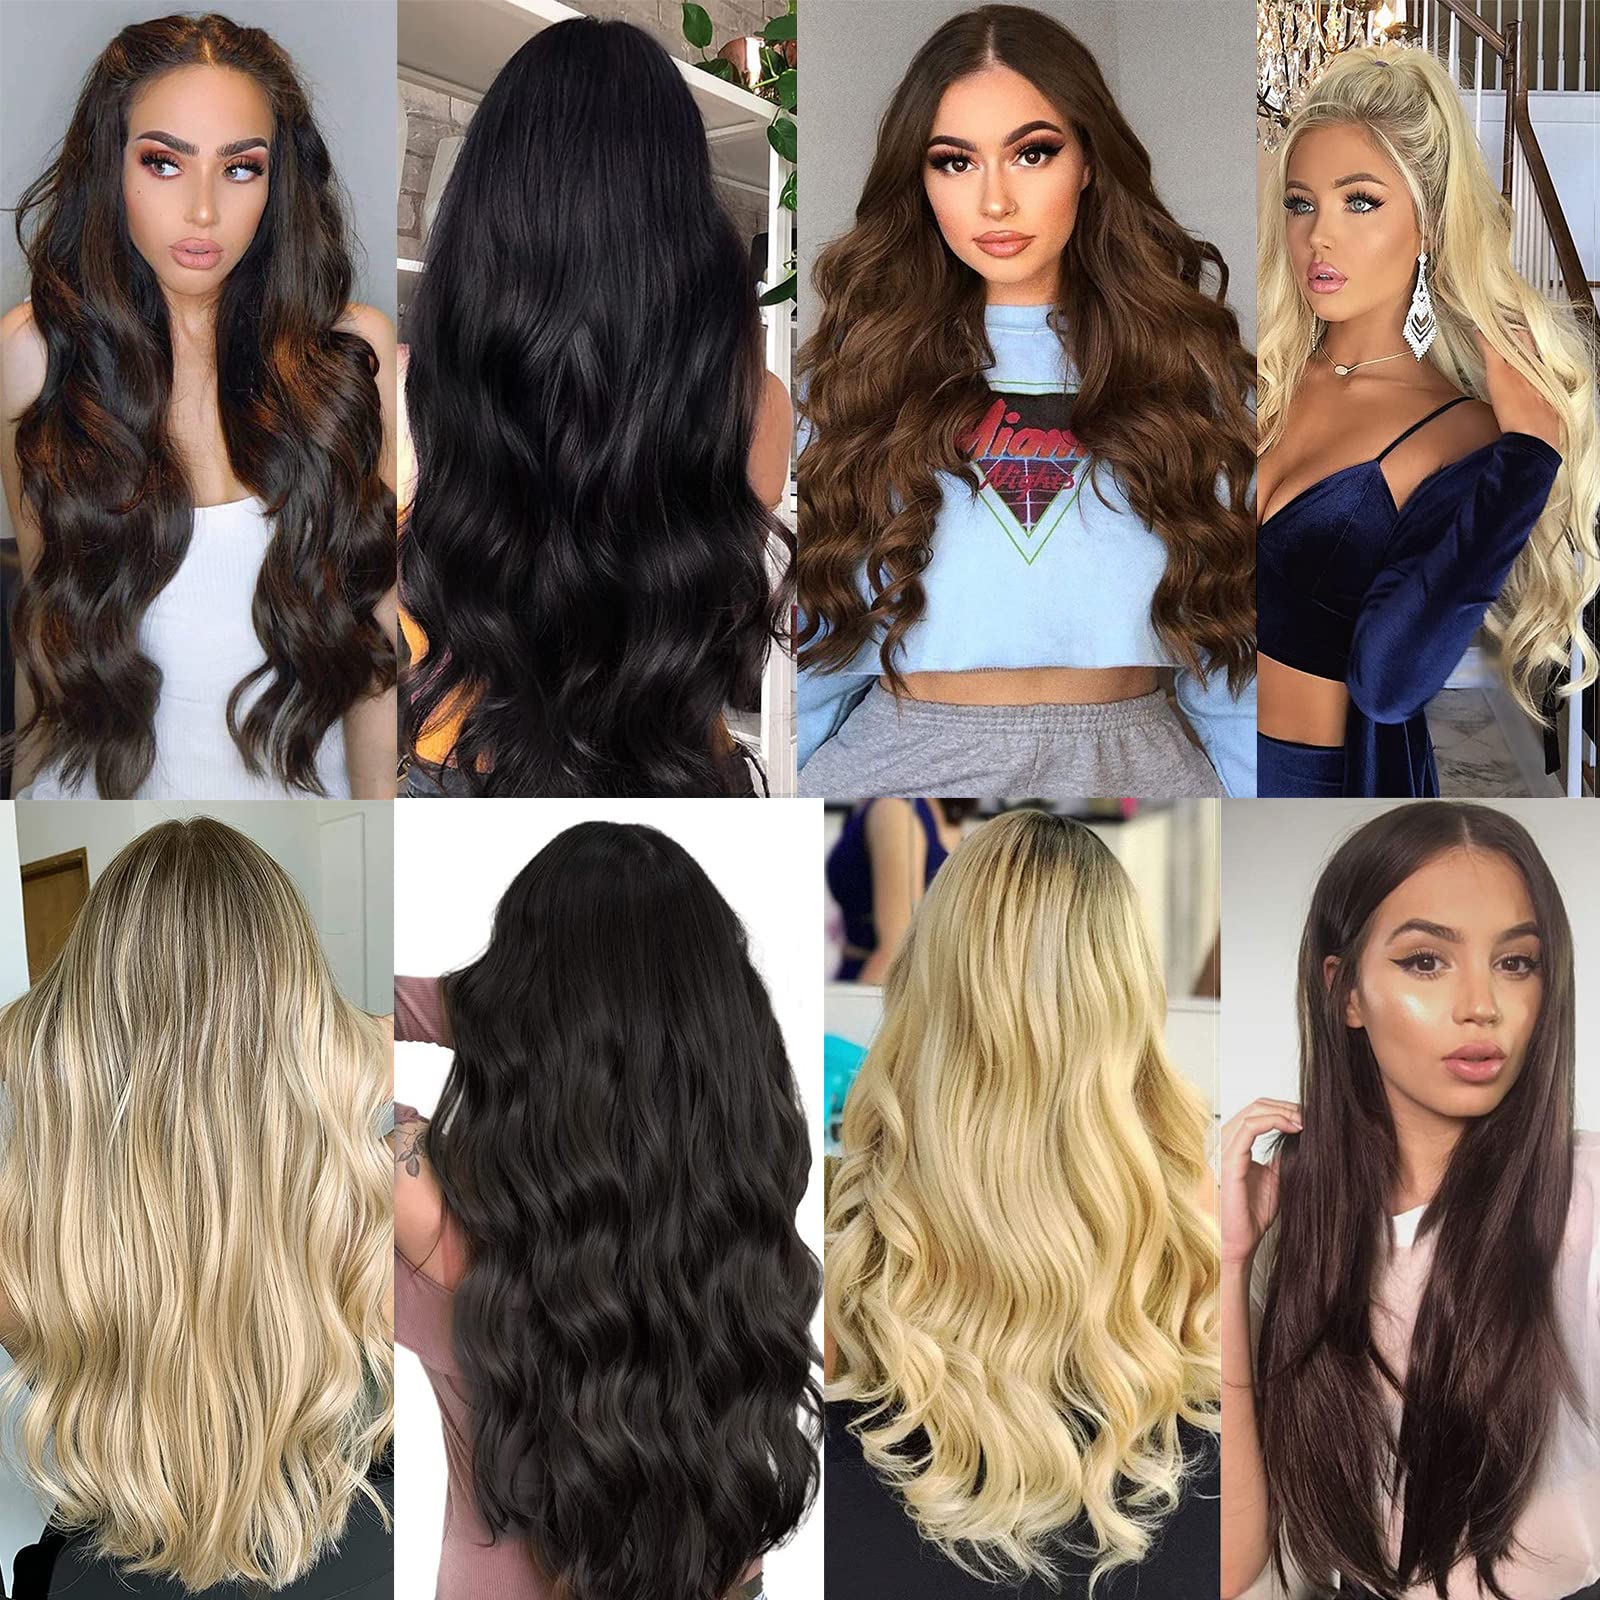 Xtrend 16 Inch Clip in Hair Extensions 4Pcs 11Clips Straight Thick Full Head Double Weft Clip on Synthetic Hair Extension Hairpieces for Women 18H613#